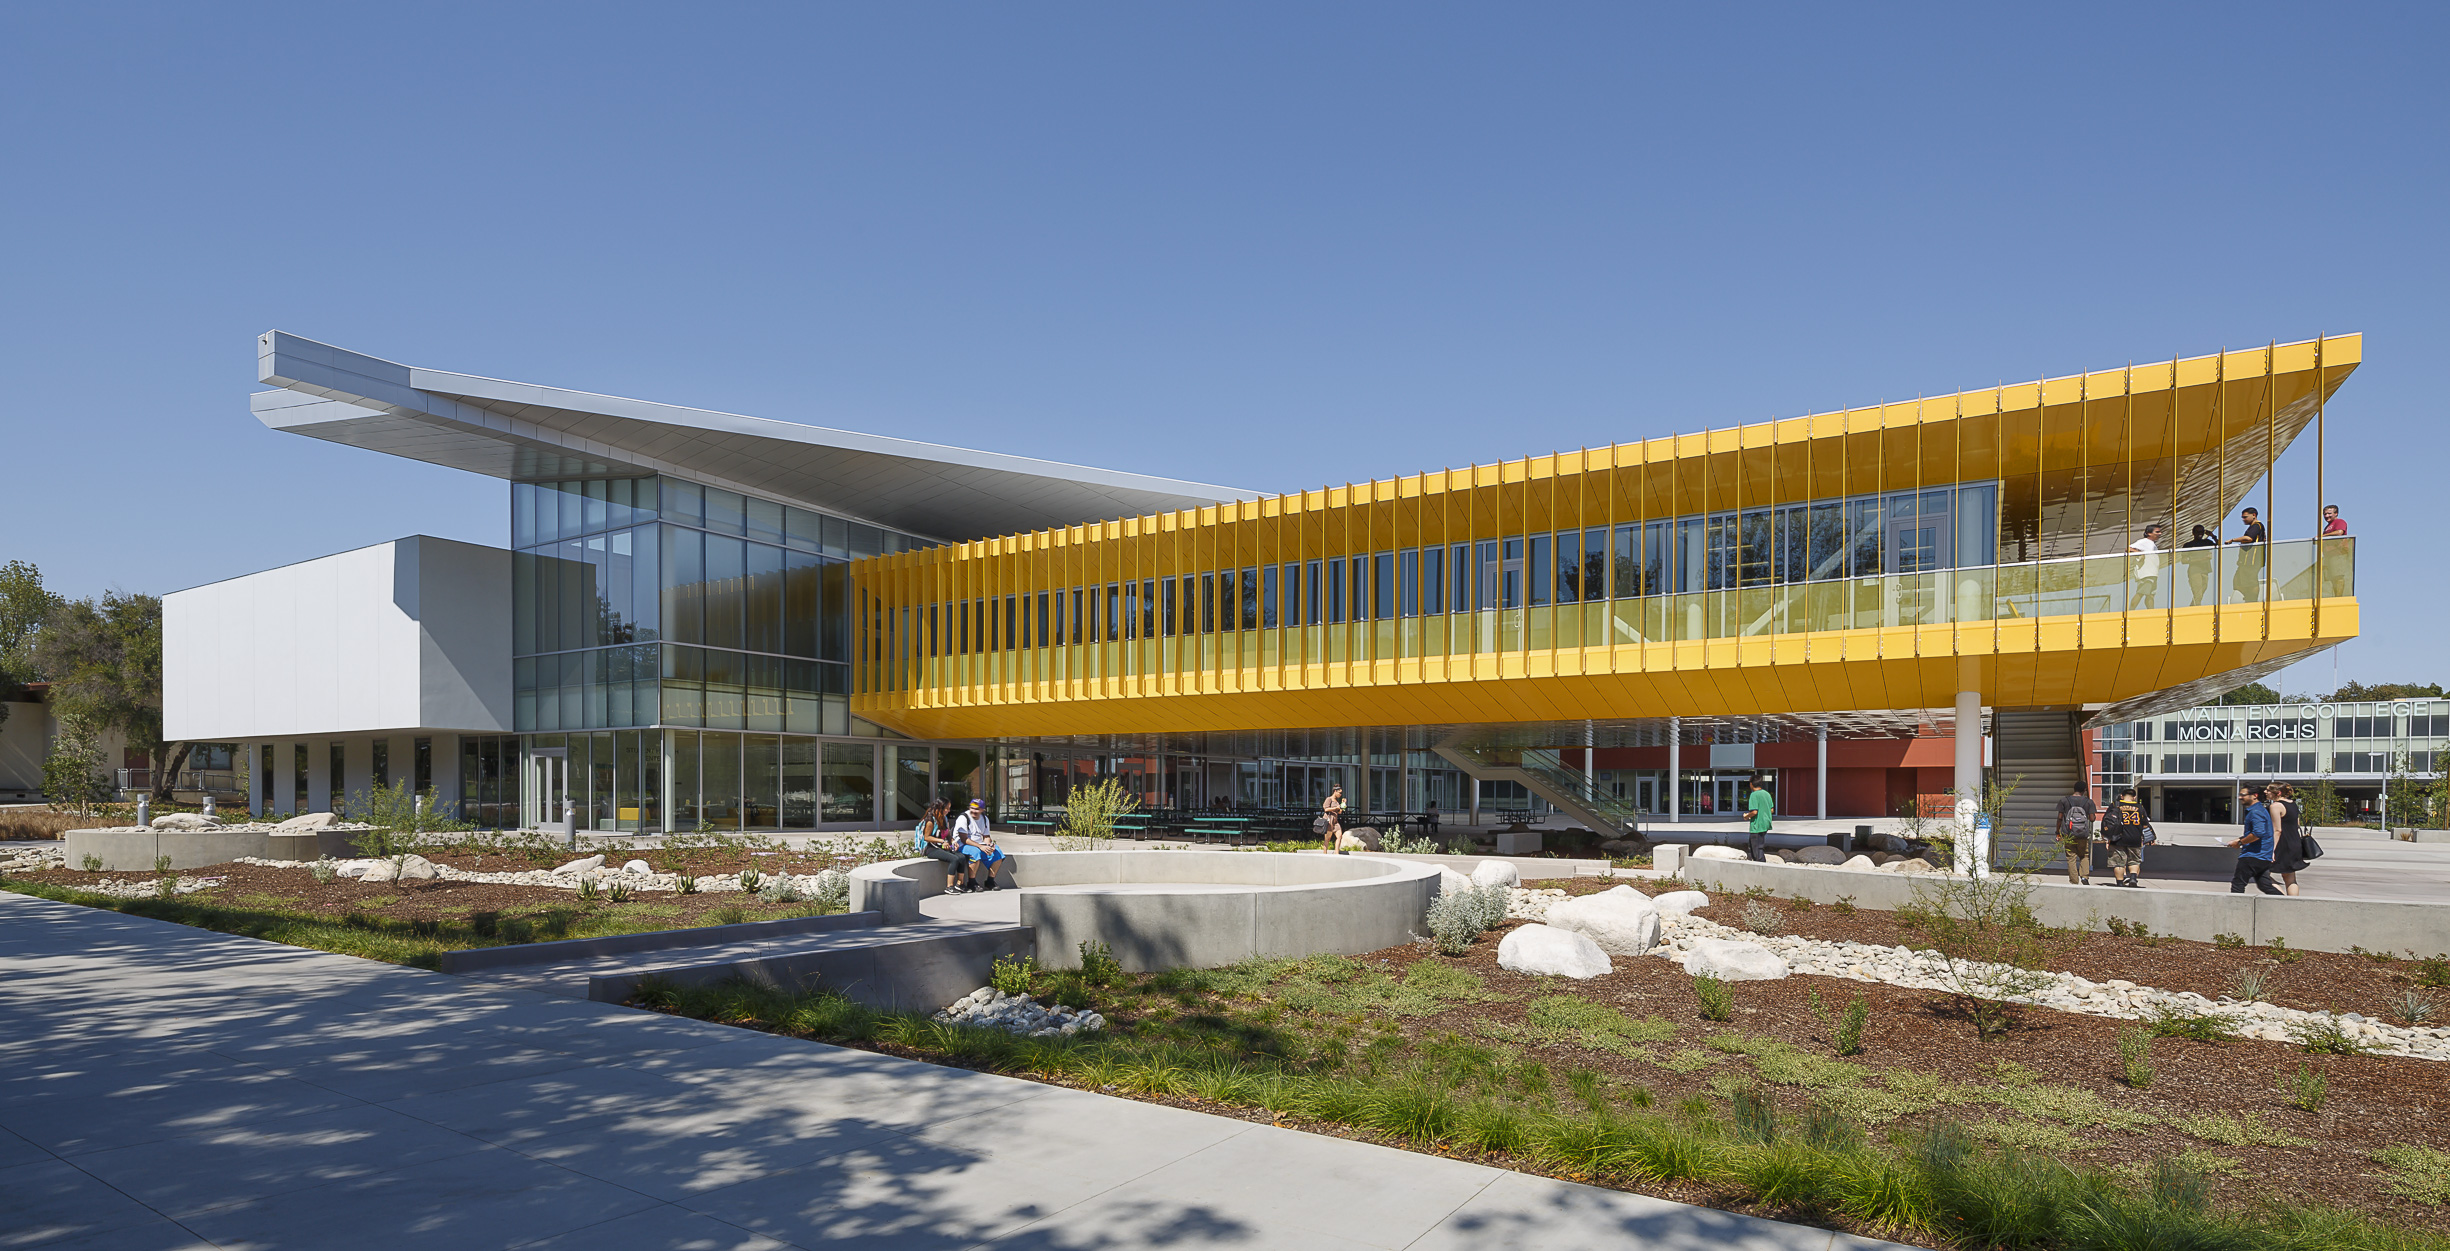 Los Angeles Valley College’s Monarch Student Center received an Award of Merit and a Committee on the Environment (COTE) Award.